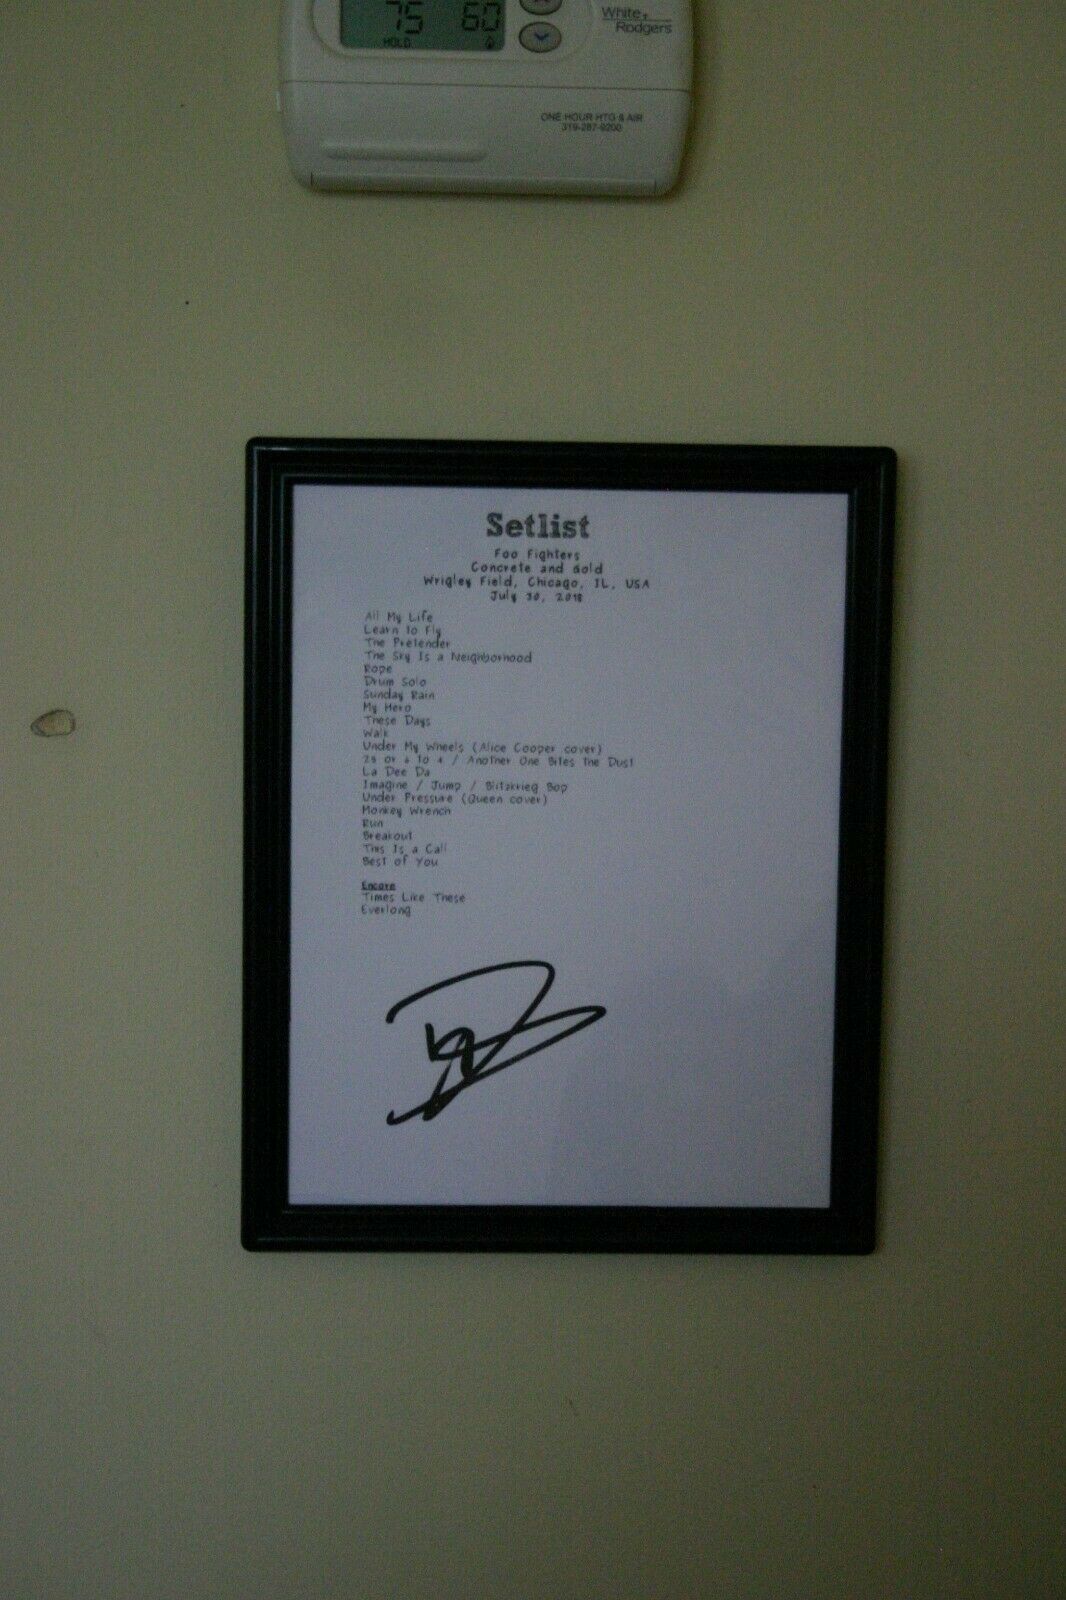 Dave Grohl Signed Foo Fighters Setlist Wrigley Field 2018 Auto Reprint Framed